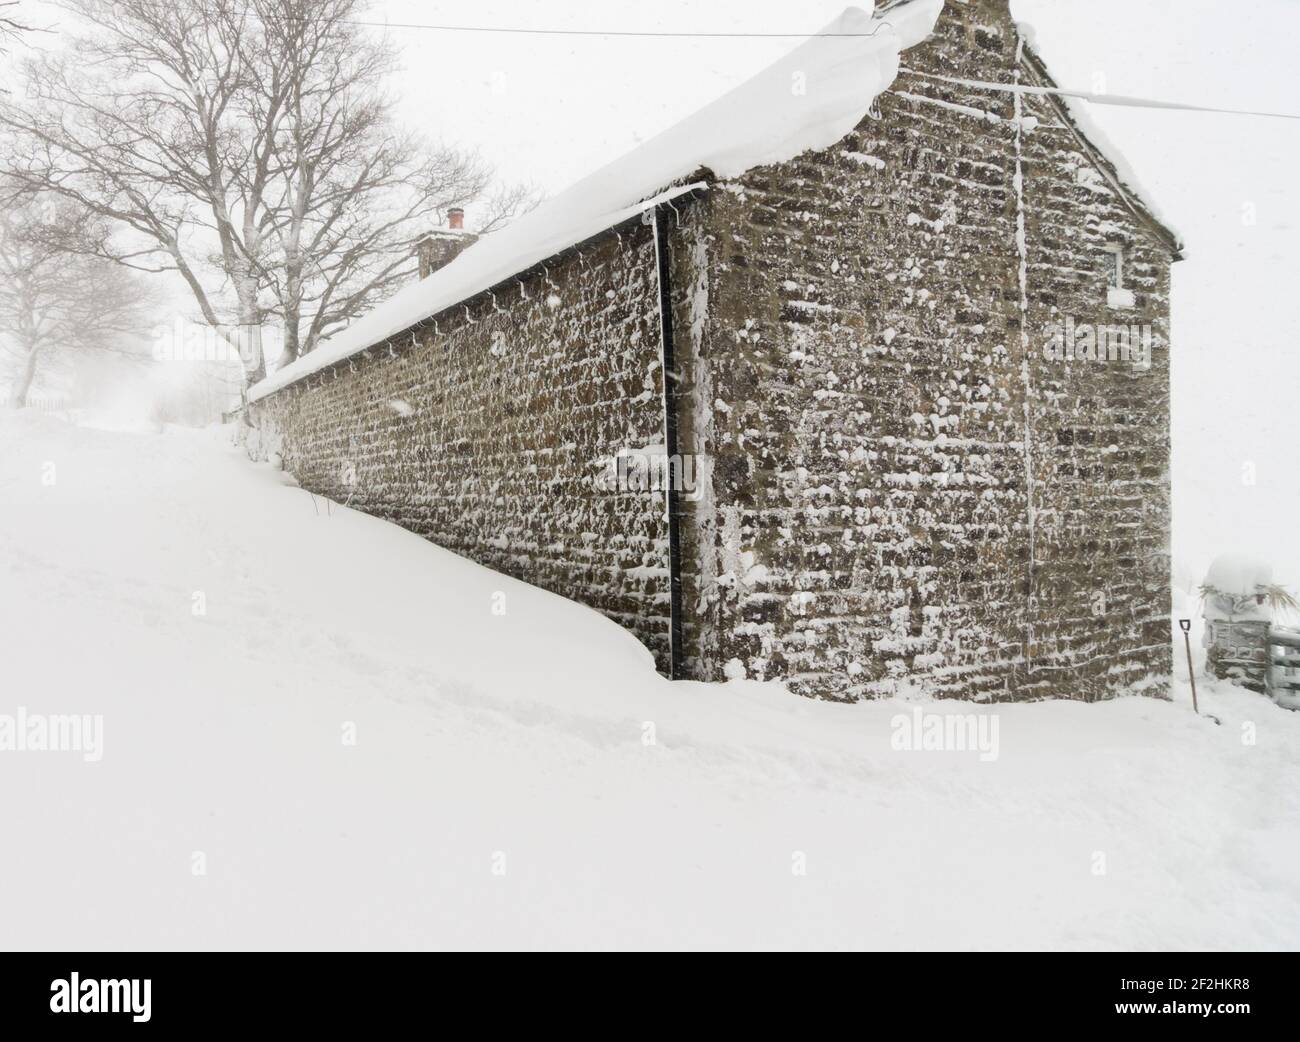 An old stone house built into a steep bank covered in heavy snow in Weardale, the North Pennines, County Durham, UK Stock Photo